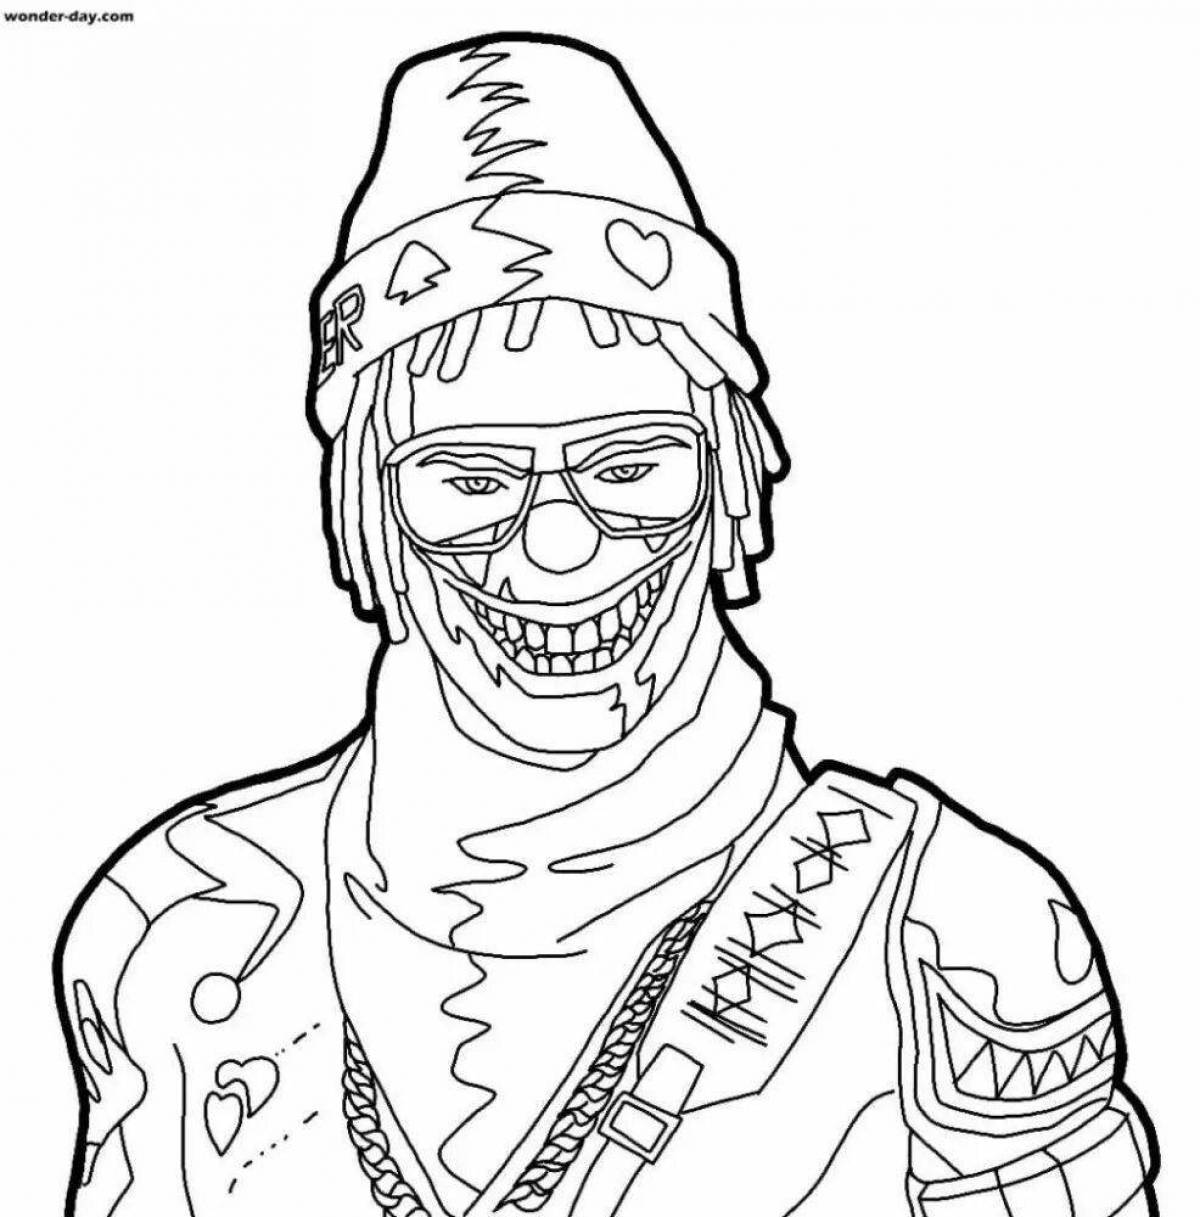 Splendid pro free fire weapon coloring page